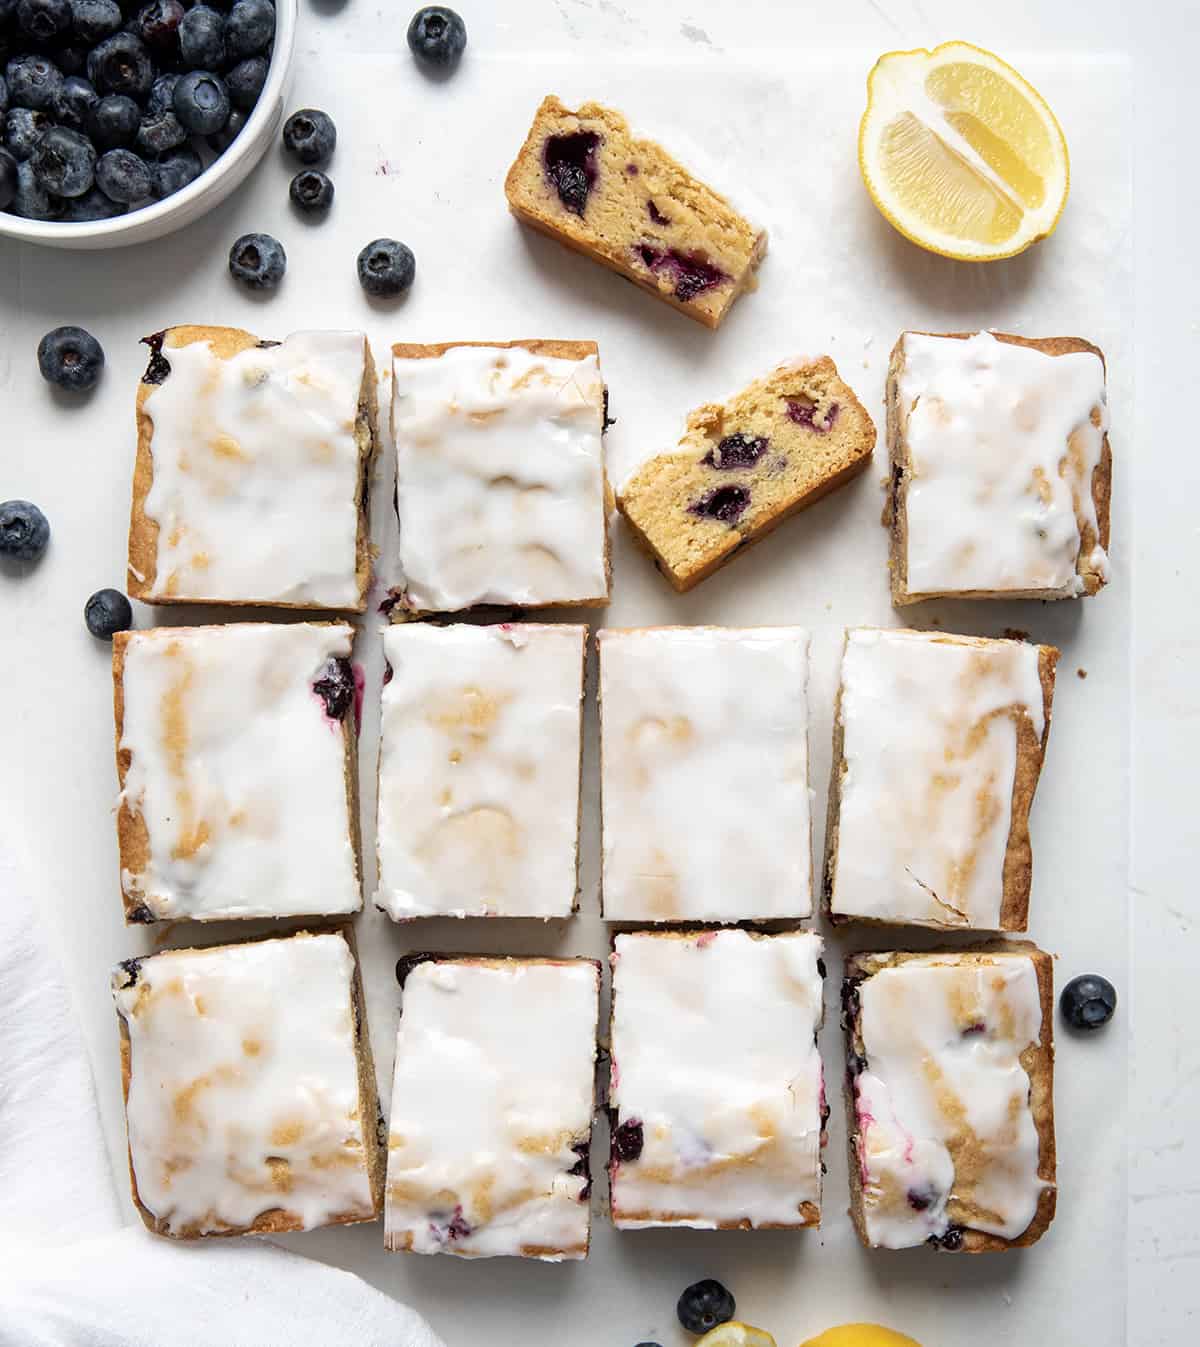 Lemon Blueberry Blondies cut into pieces with some showing texture inside.